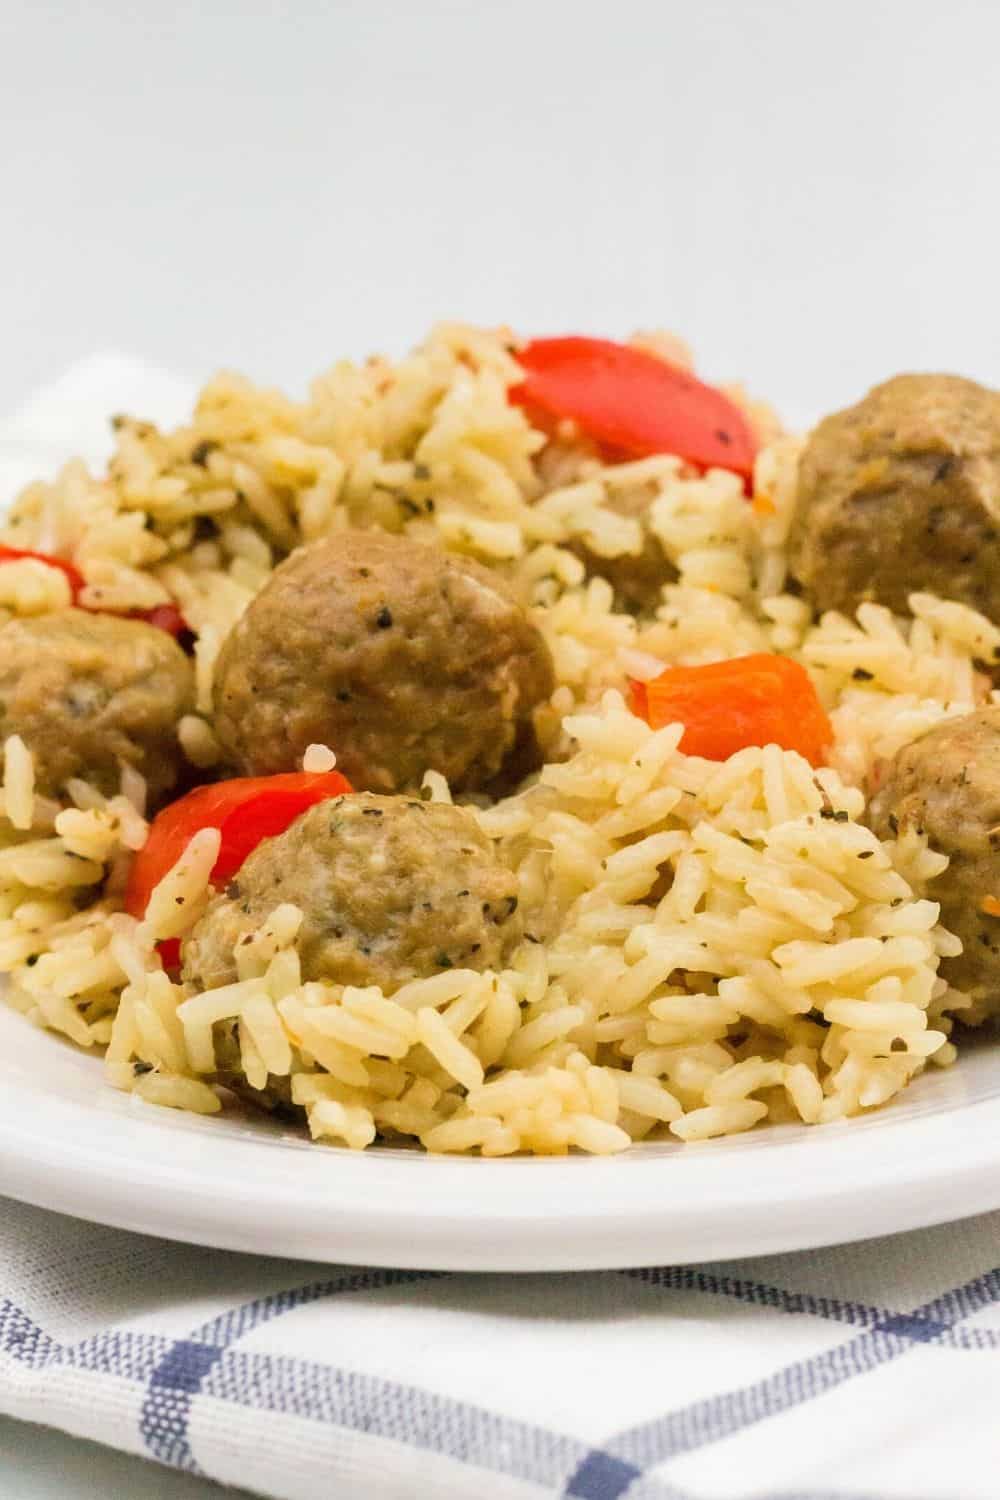 Italian meatballs and rice, along with peppers and carrots, that were cooked in the Instant Pot, served on a white plate atop a blue and white napkin